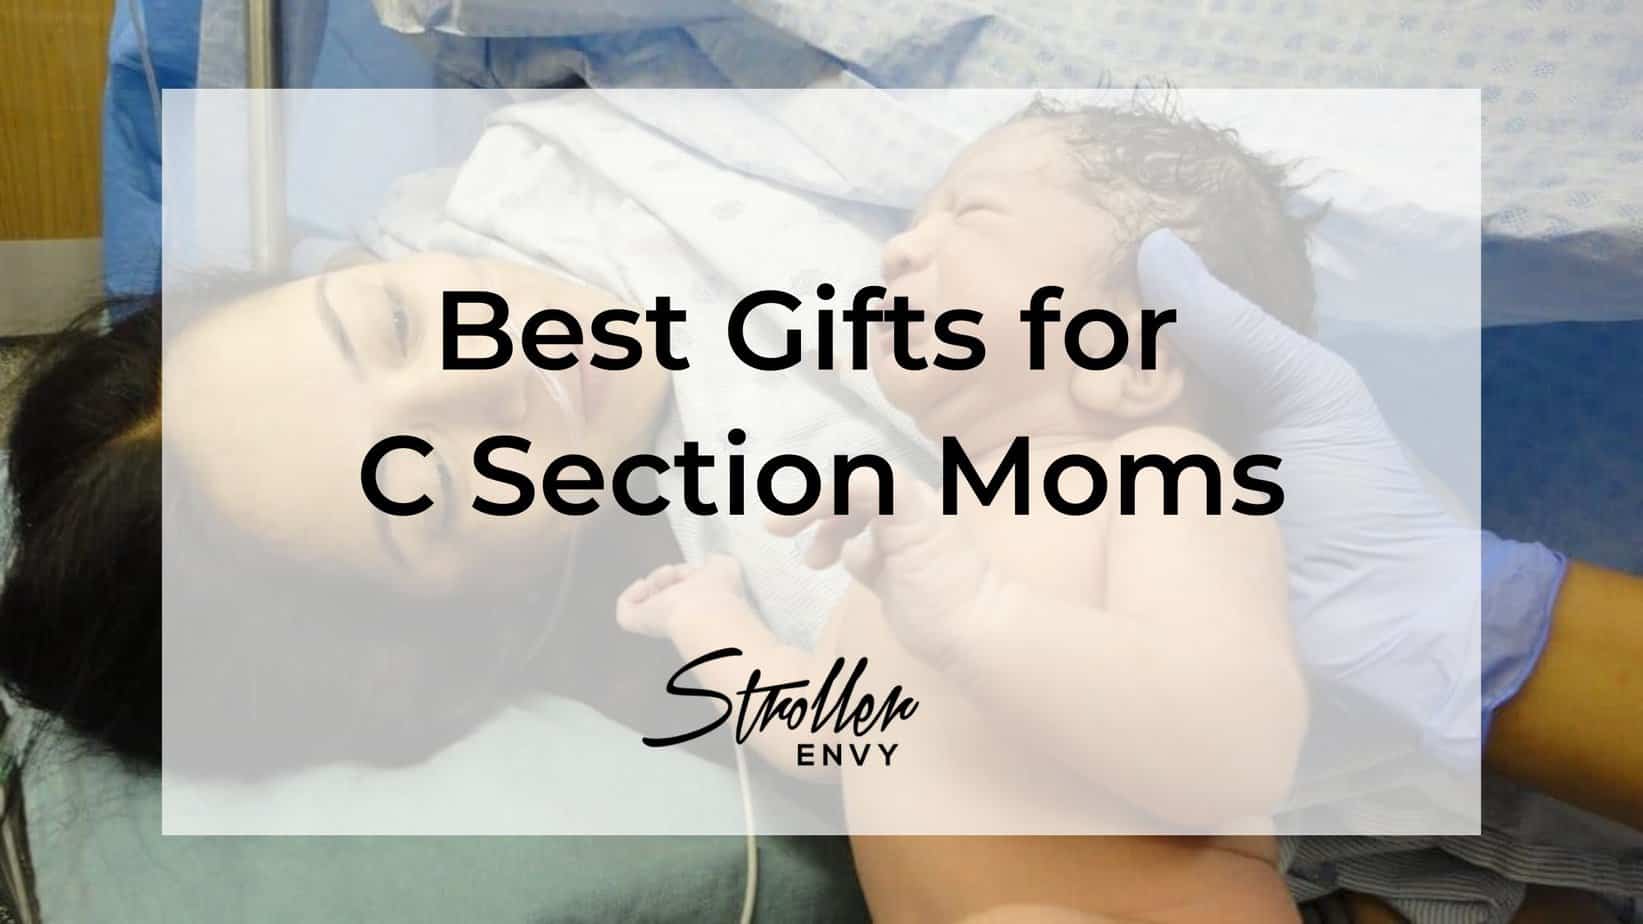 Best Gifts for C Section Moms